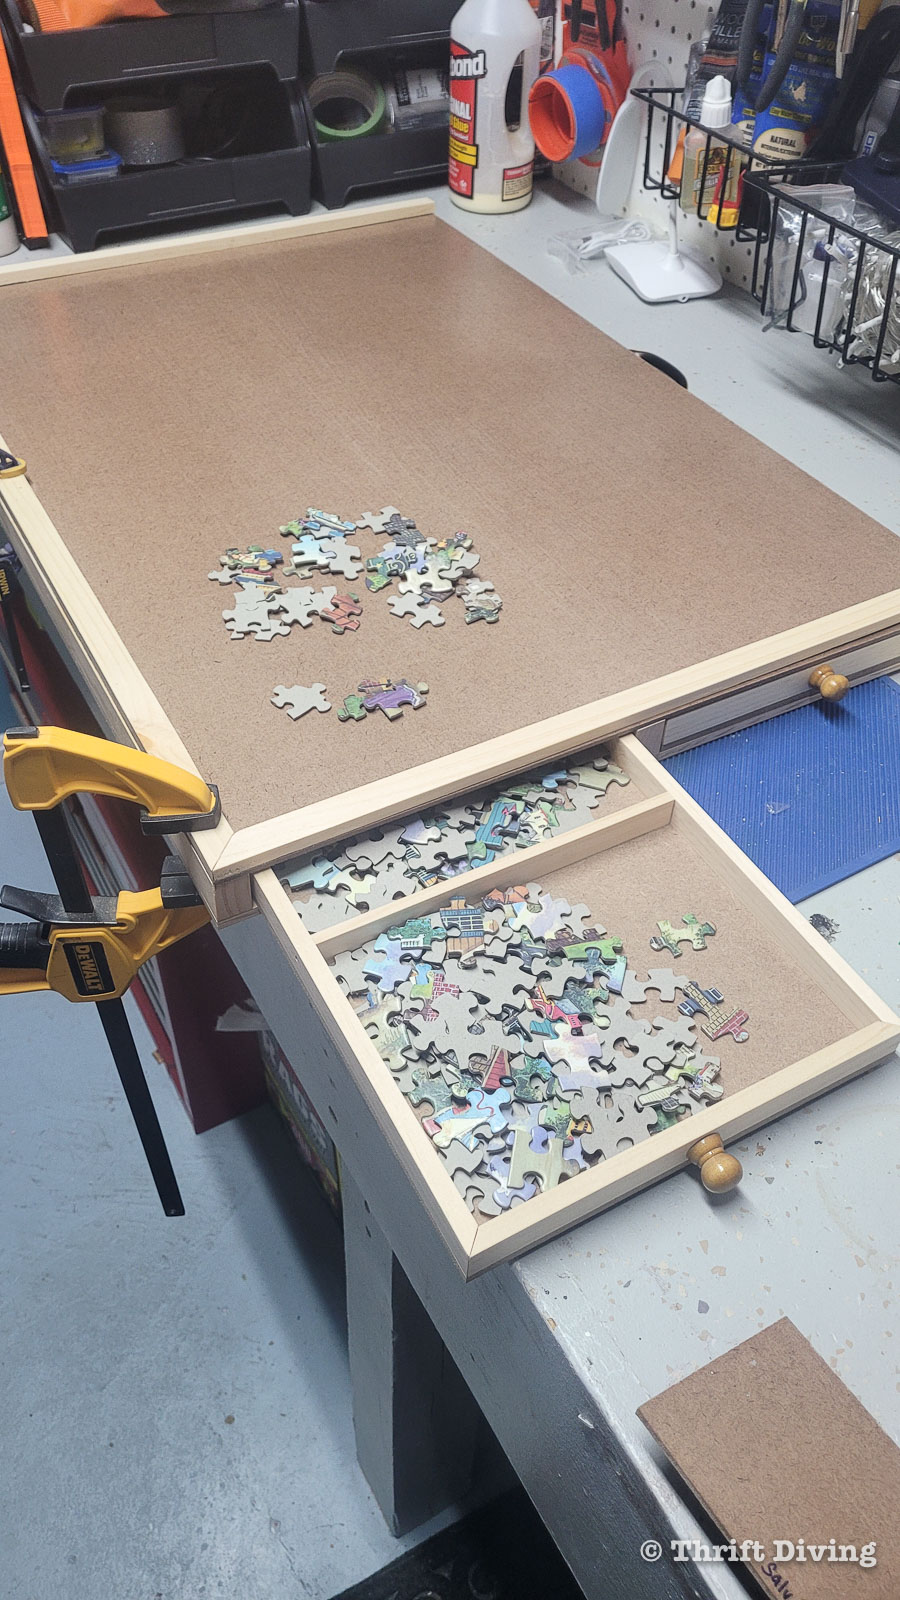 DIY Jigsaw Puzzle Table Plans: The Puzzle Table